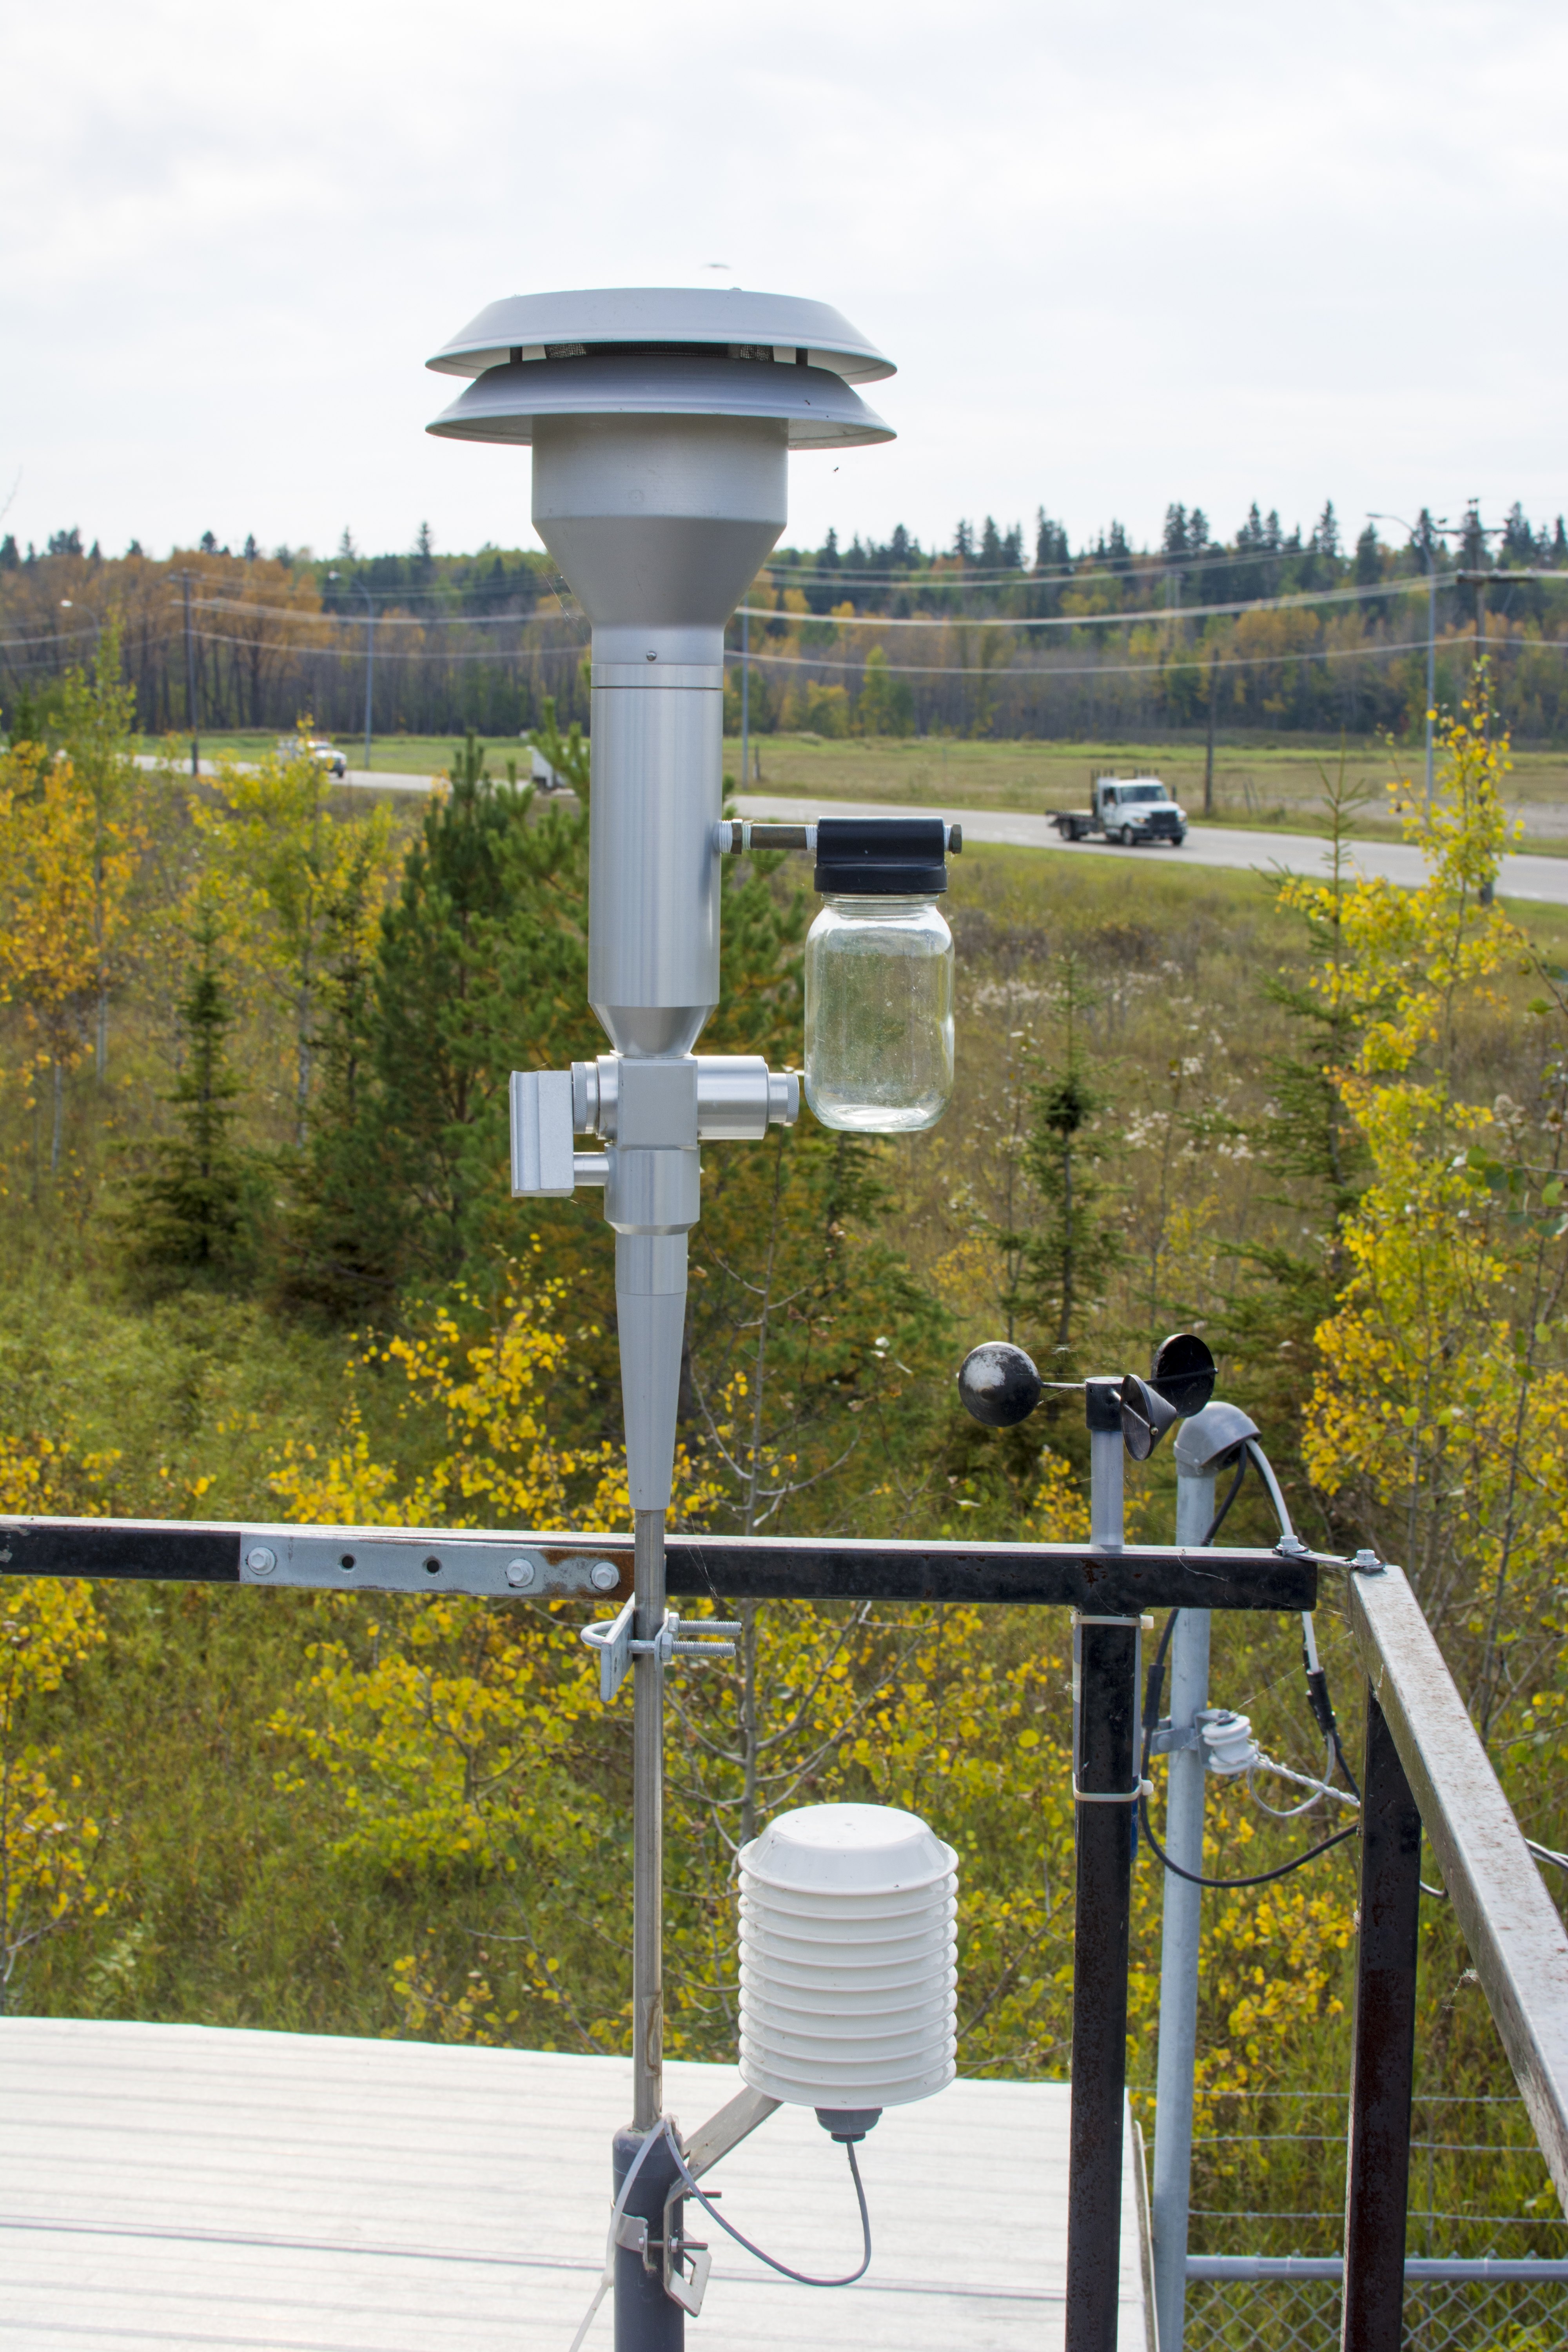 AIR MONITORING – The Parkland Airshed Management Zone’s permanent monitoring station in the Riverside Industrial Park utilizes a PM 2.5 sampling inlet to monitor levels of fine particulate matter in the air.